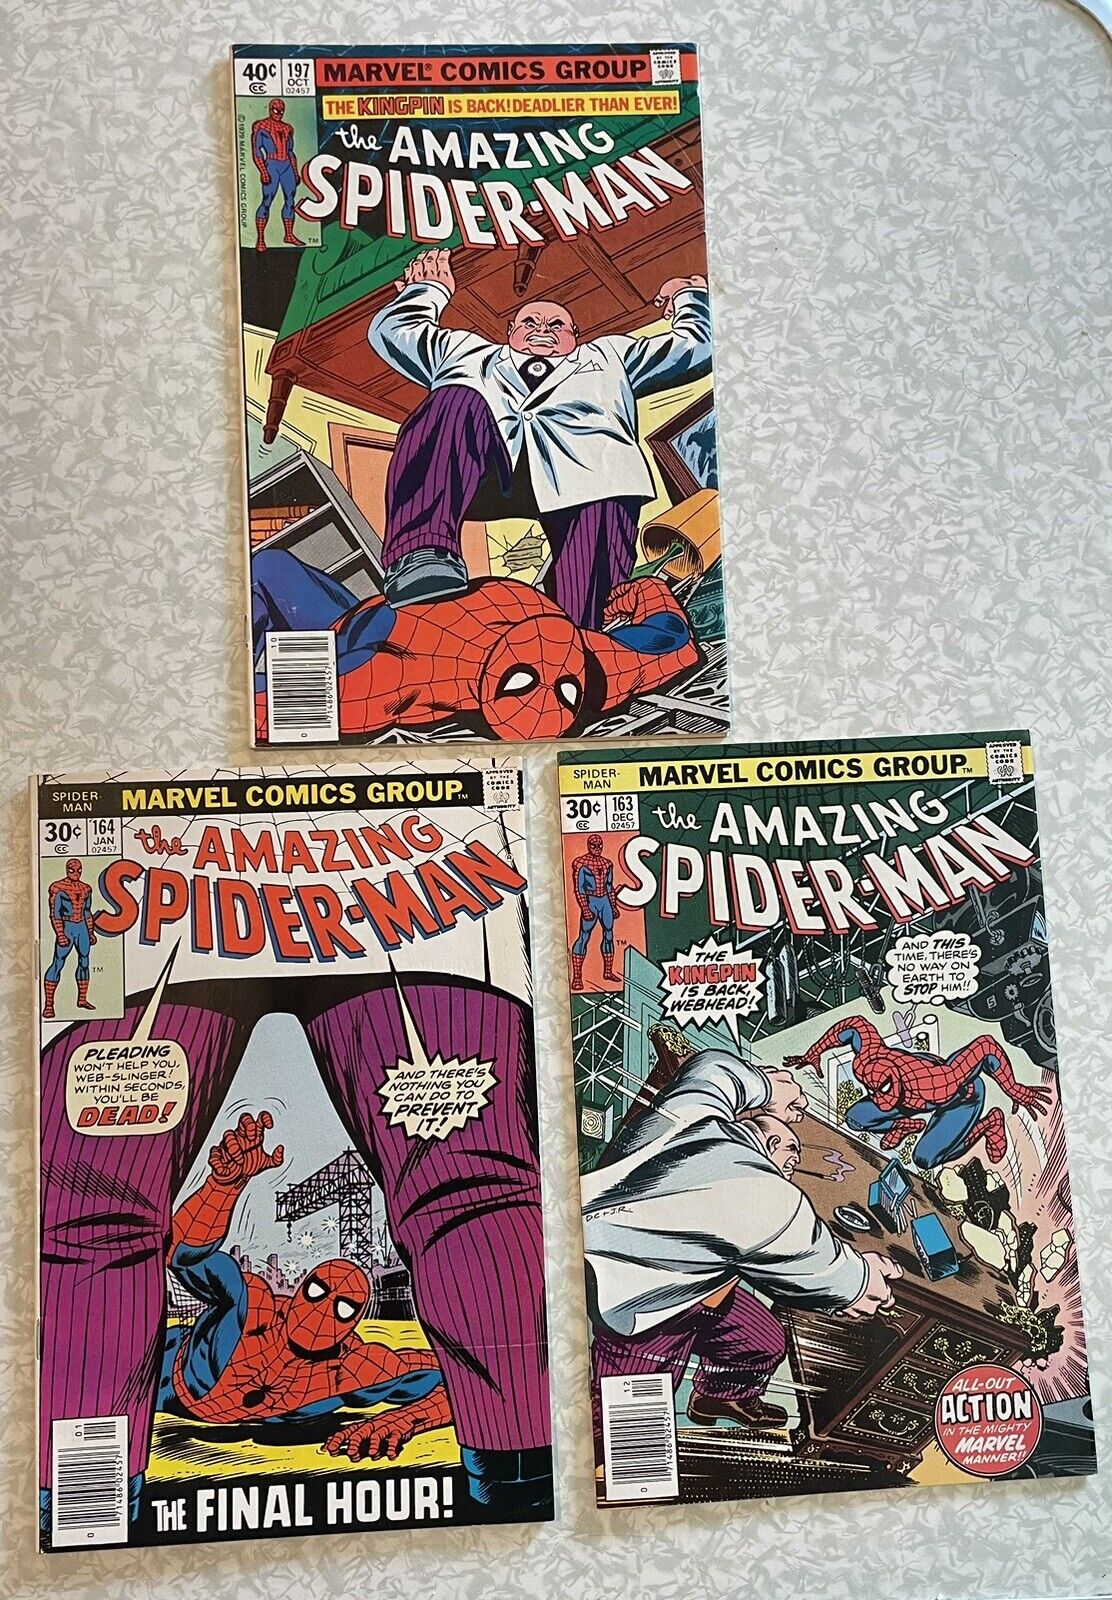 Vintage Marvel Amazing Spider-Man Comic Book Lot Featuring Kingpin